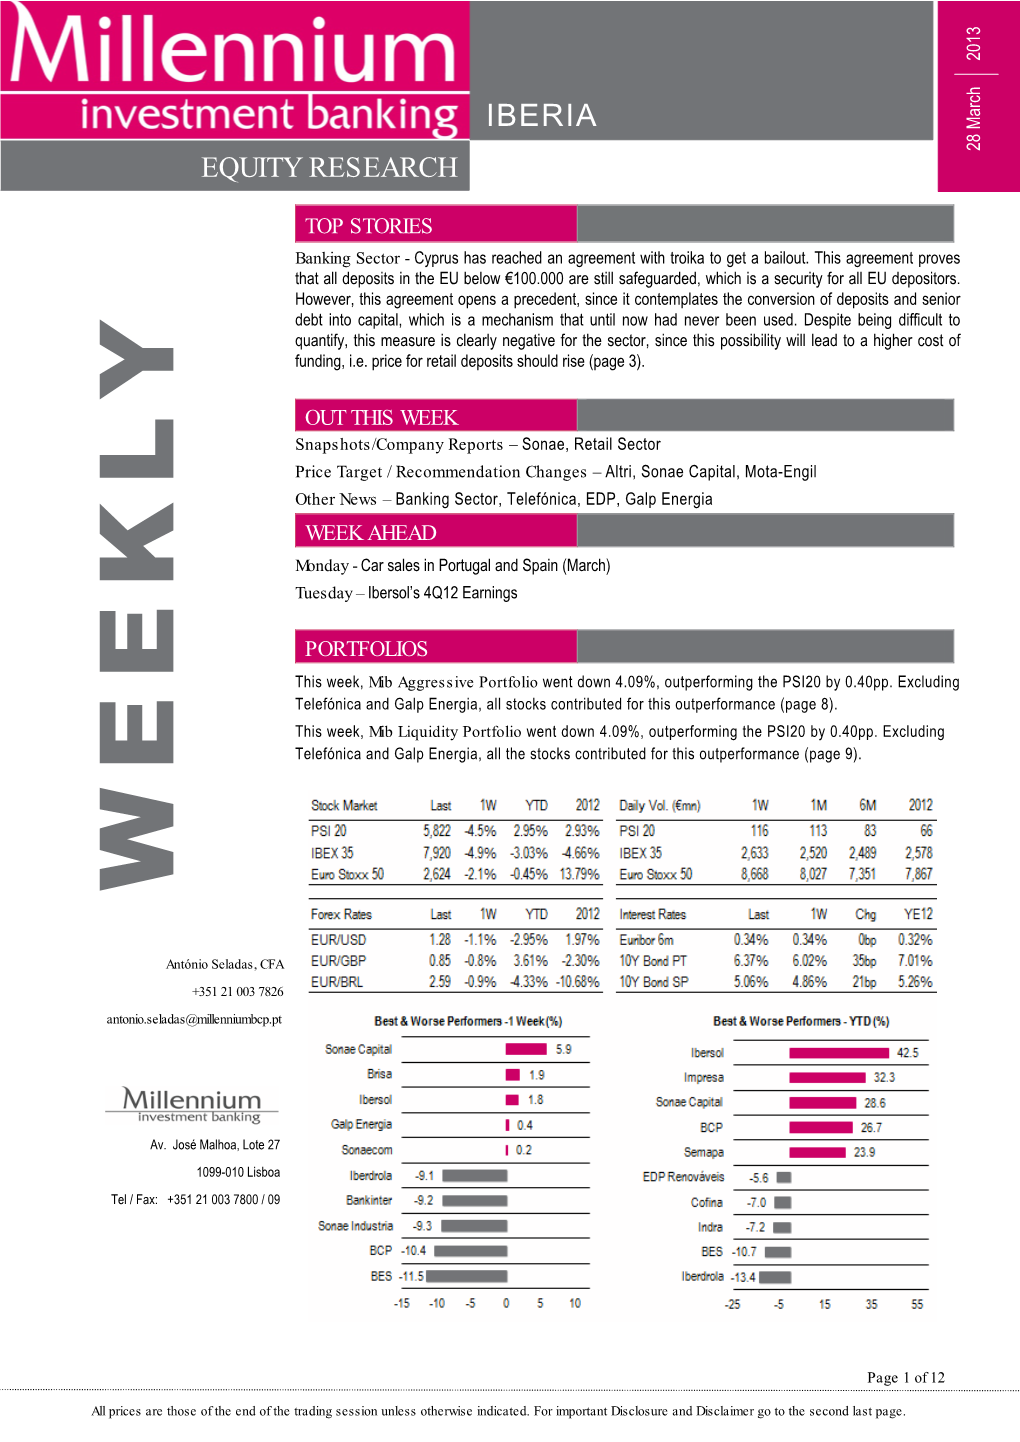 Millennium Investment Banking Weekly 28 March 2013